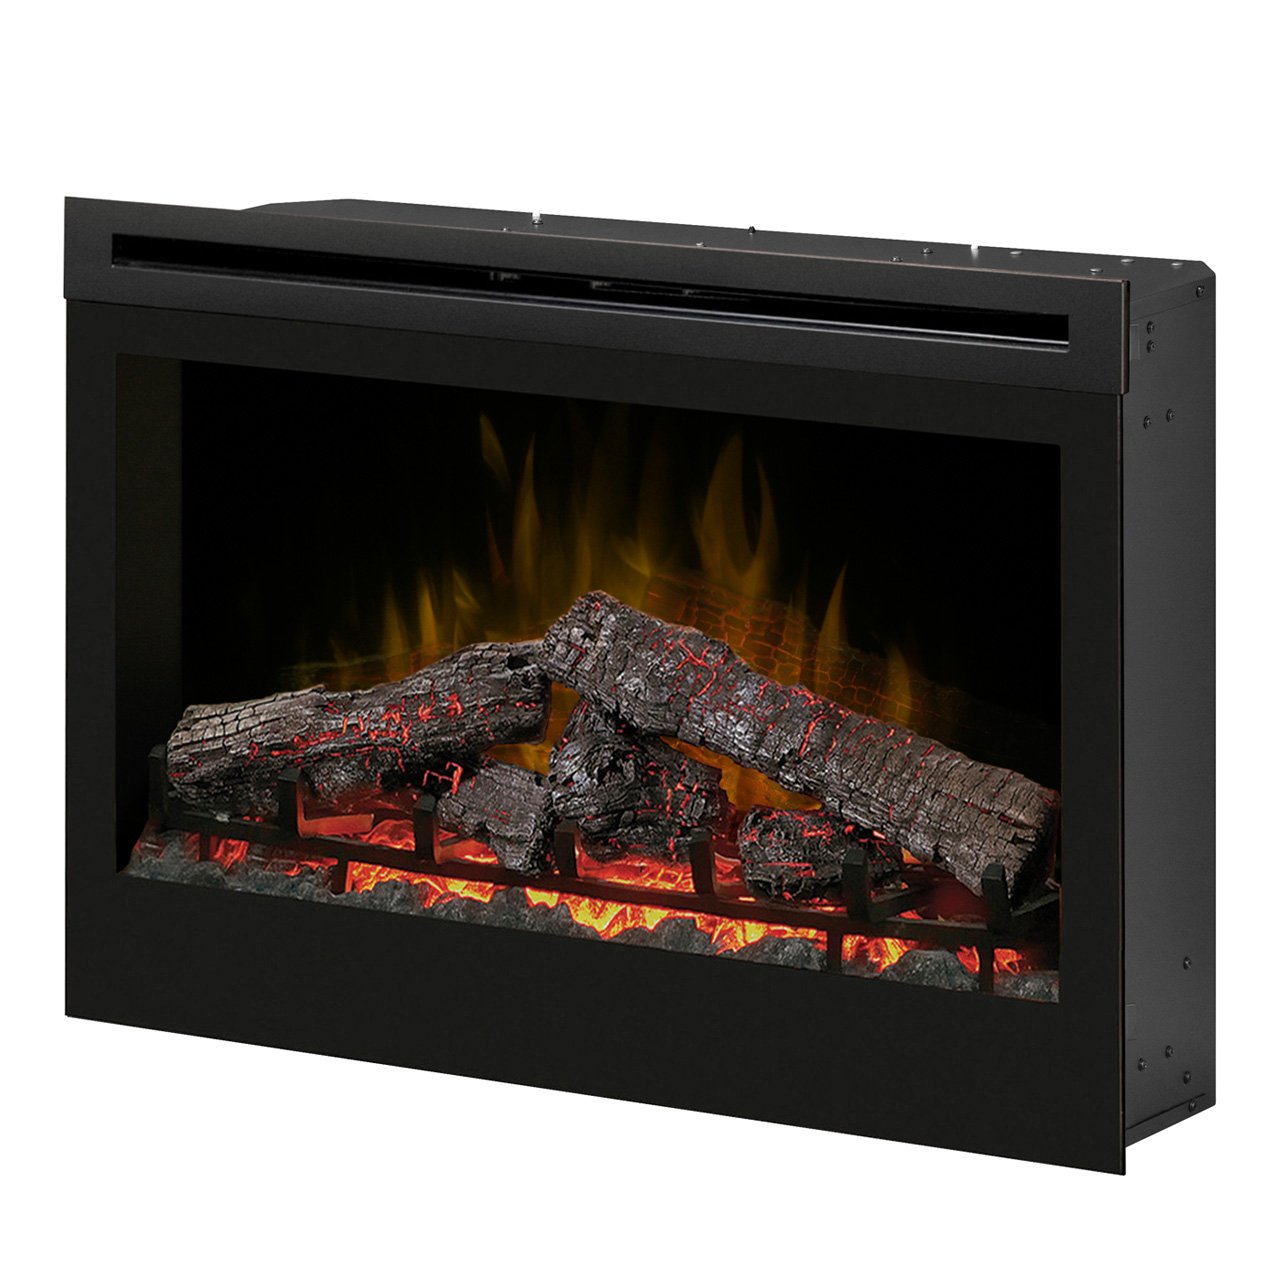 Electric Fireplaces Direct Best Of Dimplex Df3033st 33 Inch Self Trimming Electric Fireplace Insert